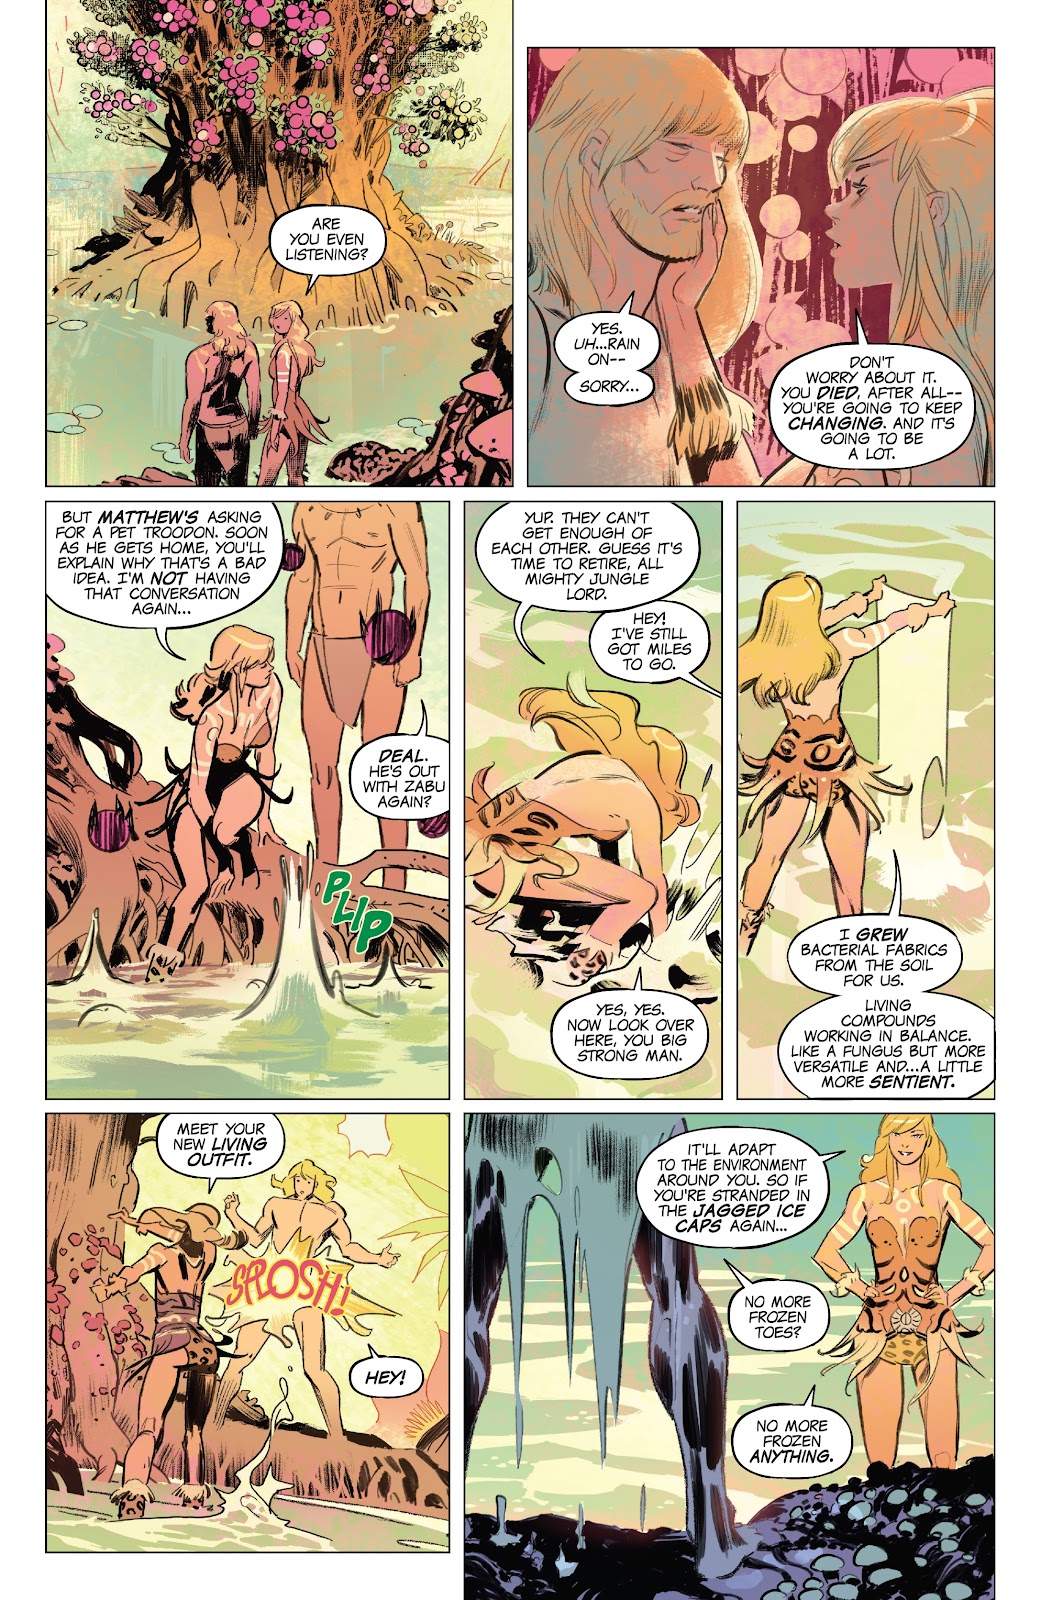 Ka-Zar Lord of the Savage Land issue 1 - Page 8